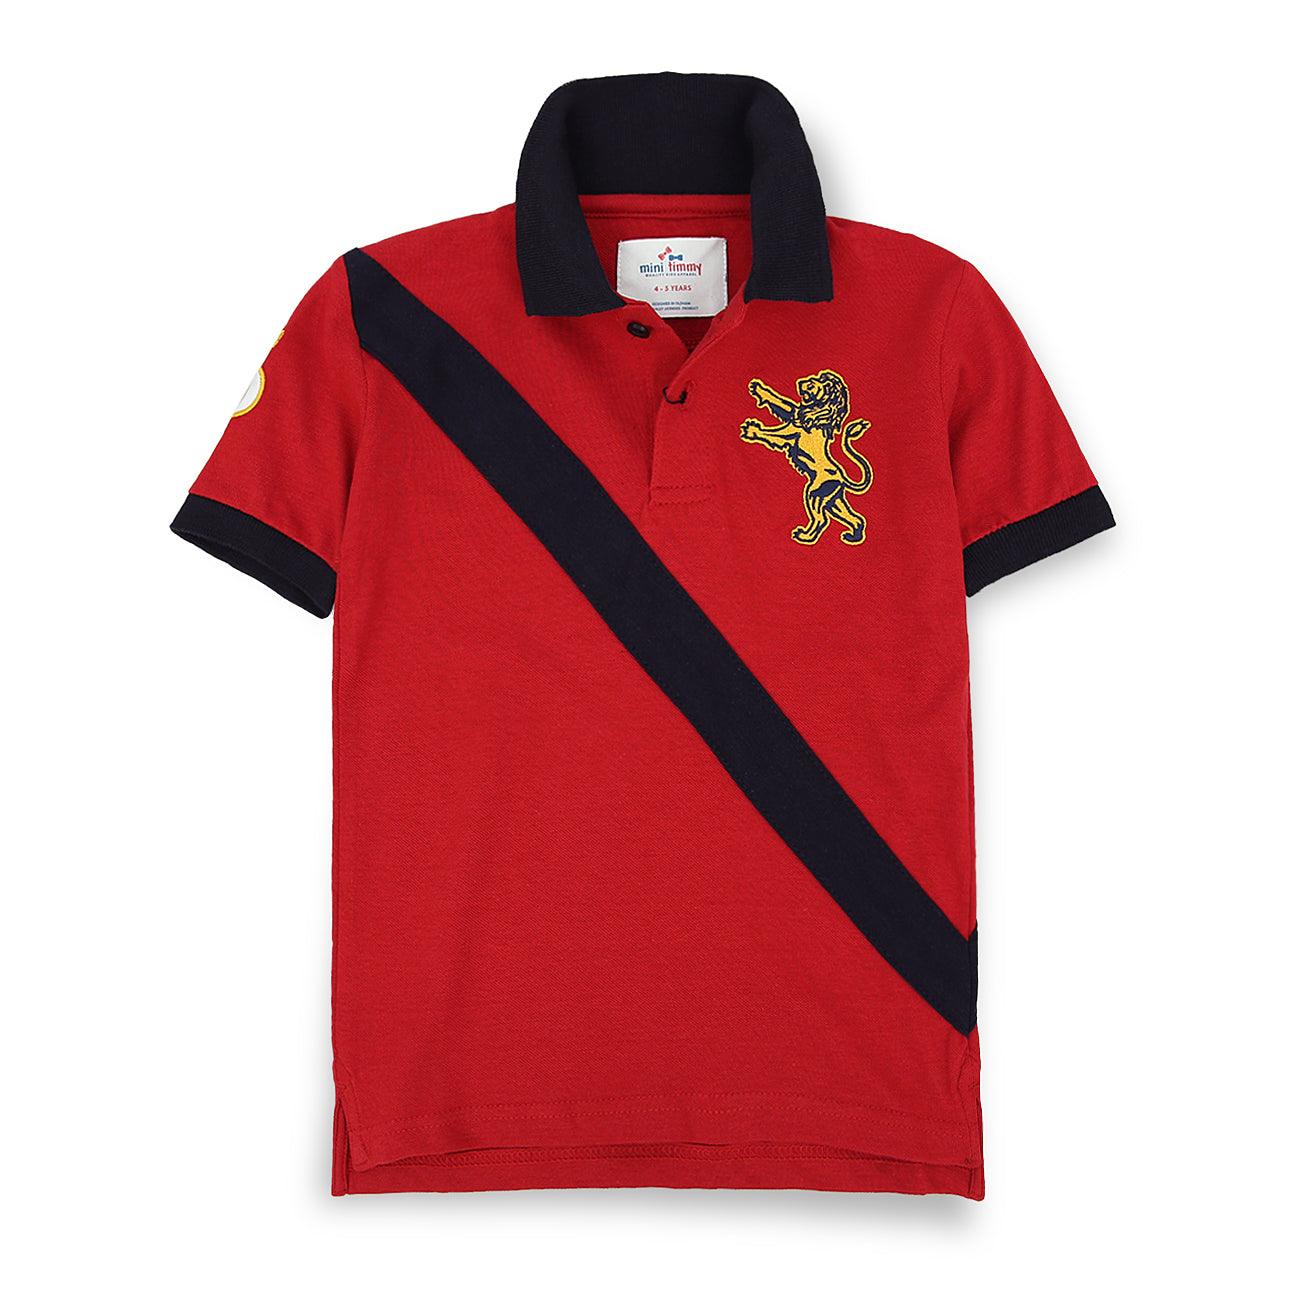 Boy's Fashion Embellished Embroidered Pique Polo Shirt 9-12 MONTH - 10 YRS - Brands River